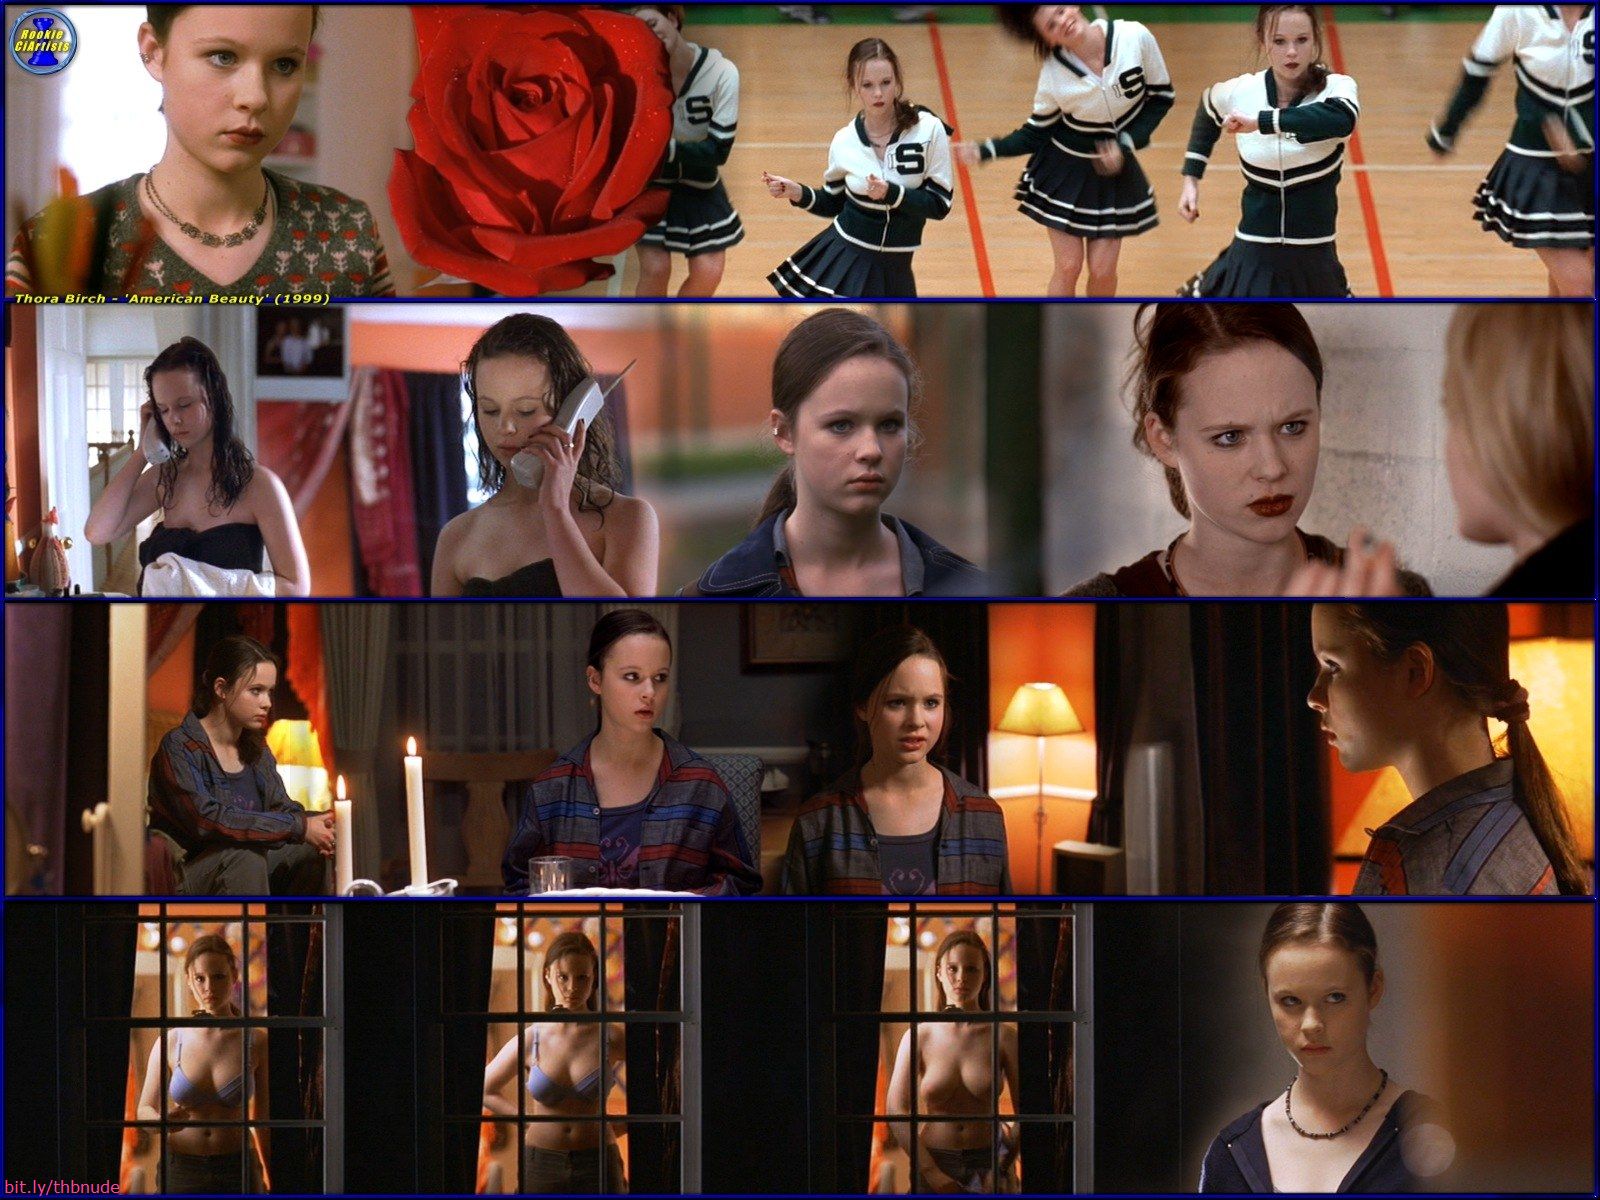 And all the notable Thora Birch nudes in existence all come from her famous...